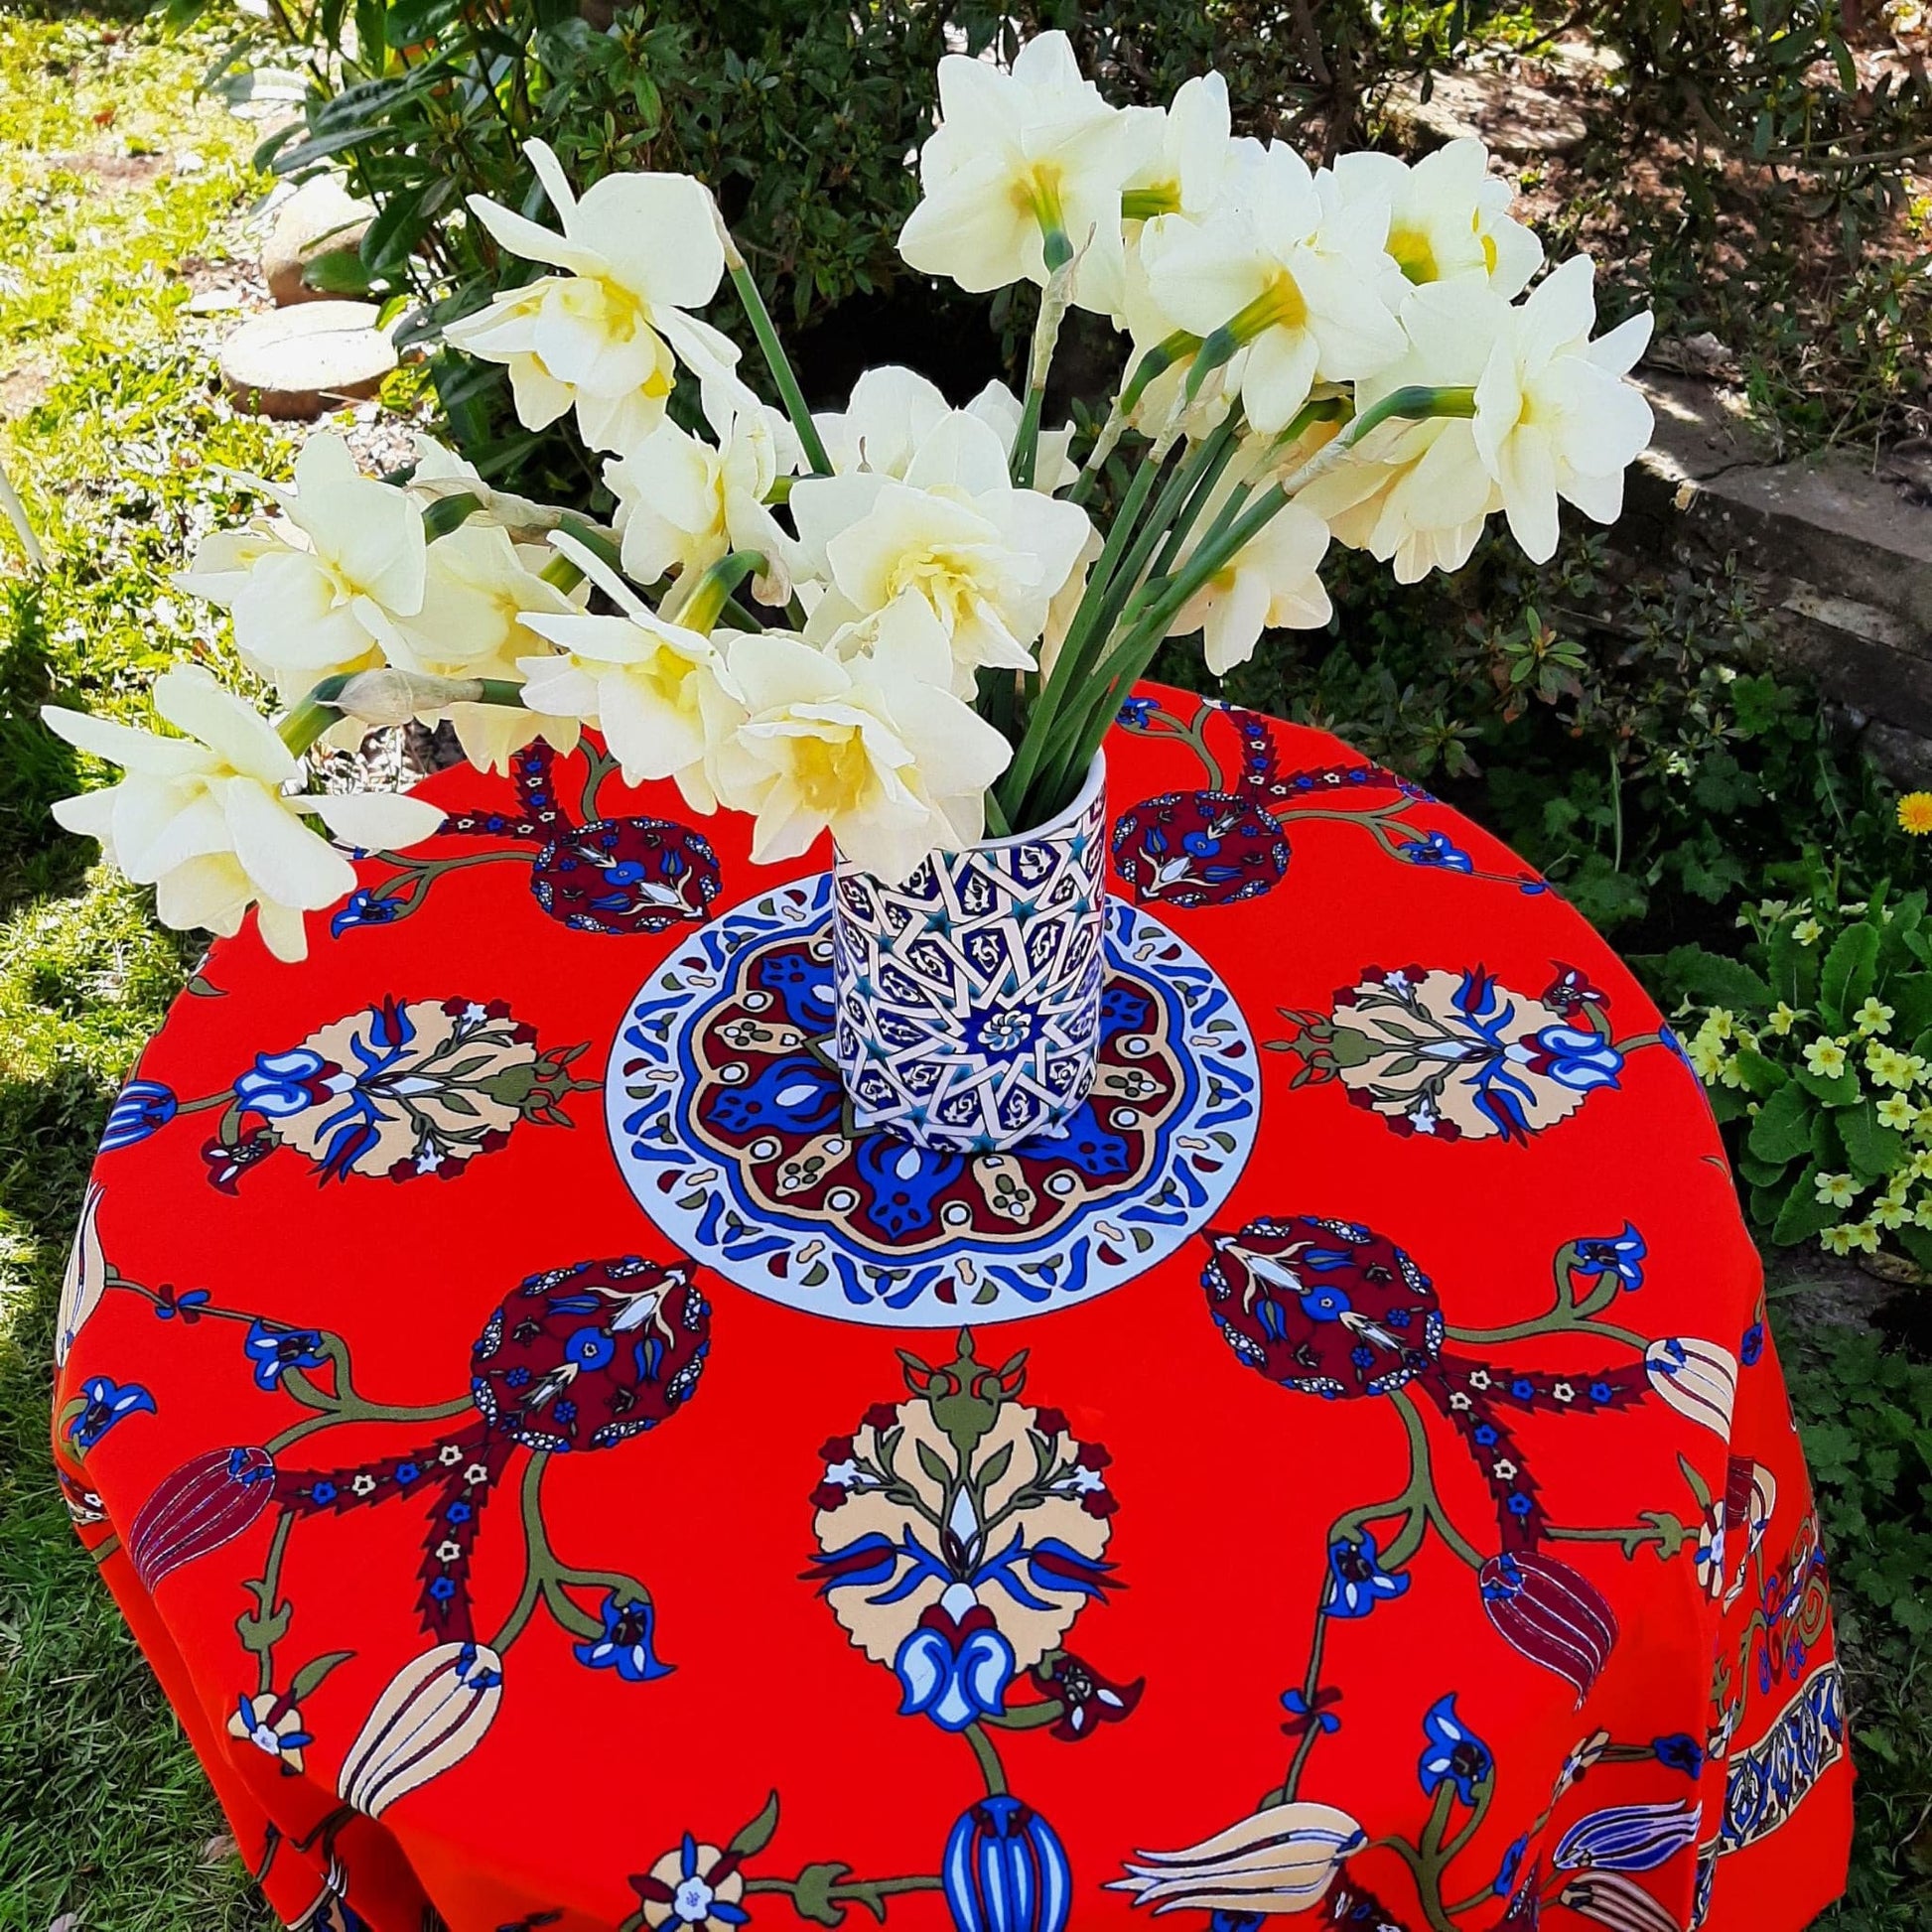 Small Turkish cotton tablecloth, scarlet red colour, tile inspired floral motifs